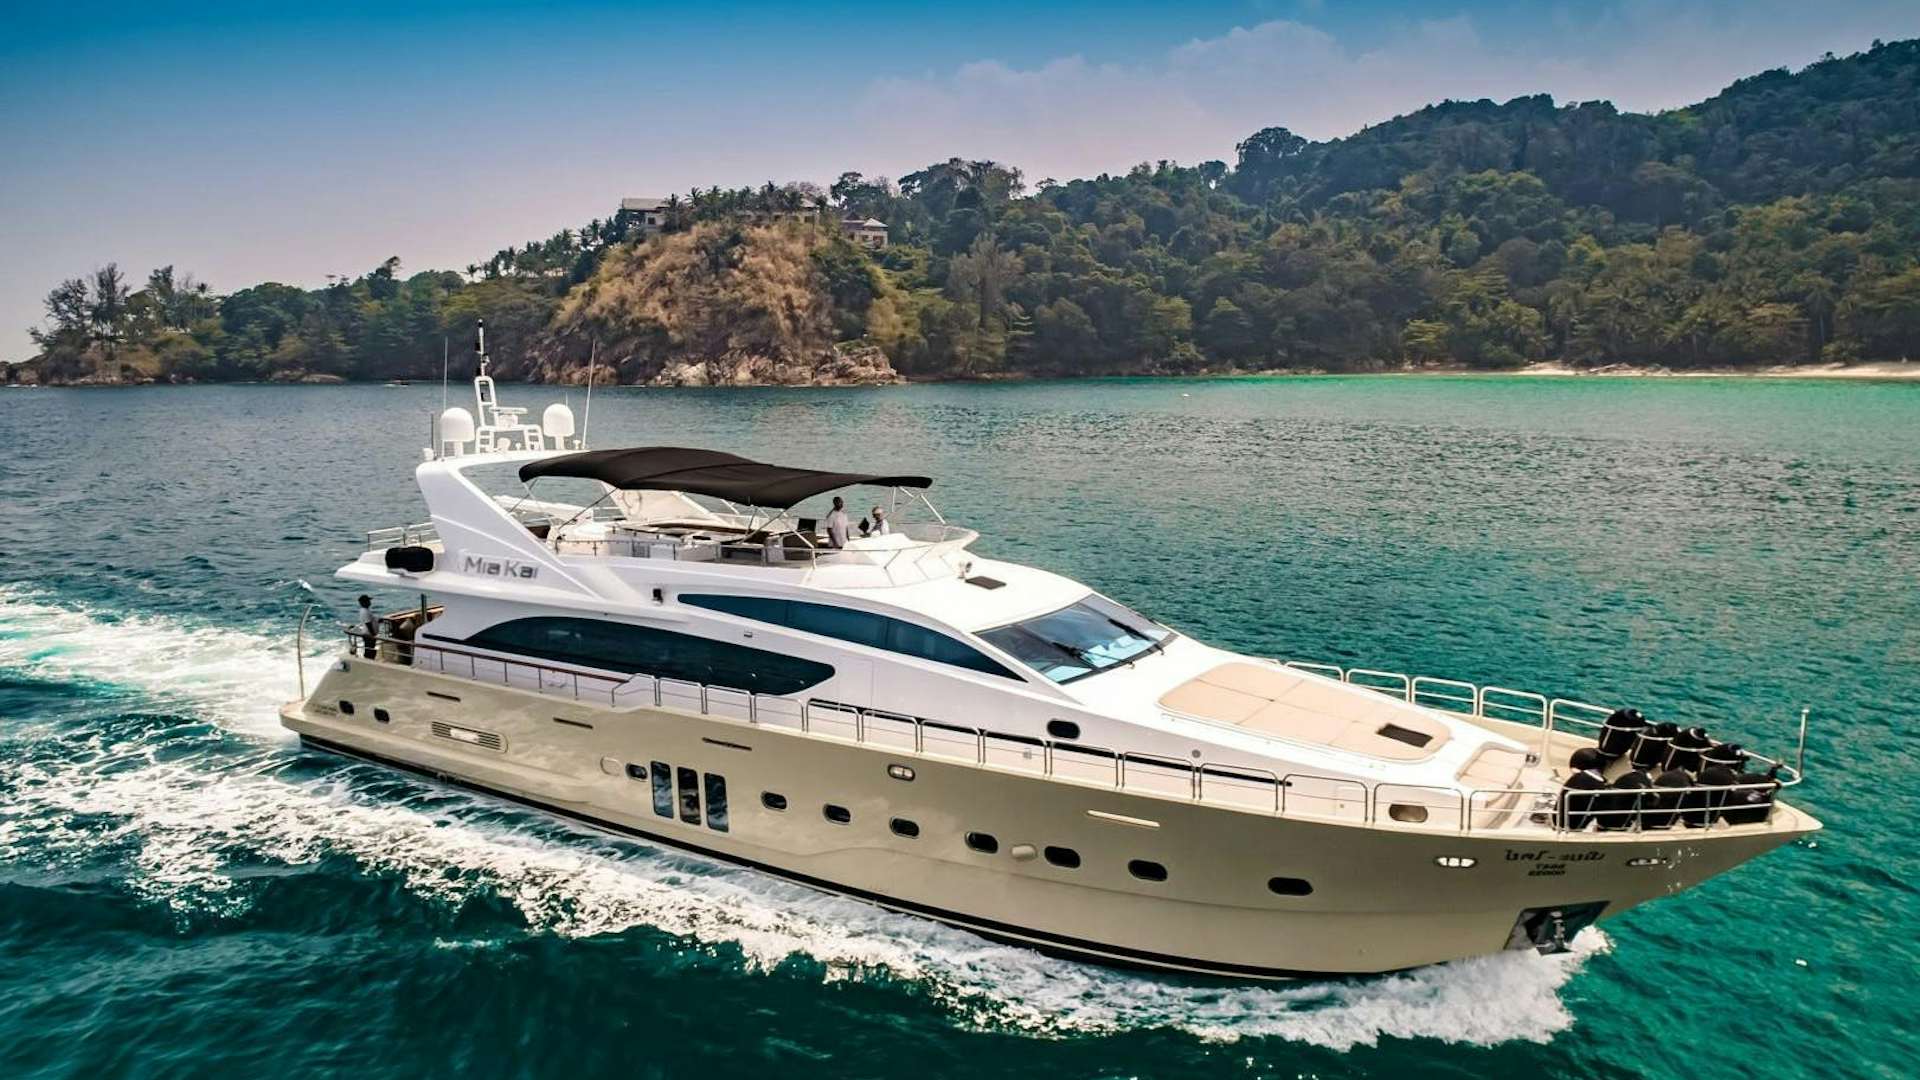 Watch Video for MIA KAI Yacht for Sale